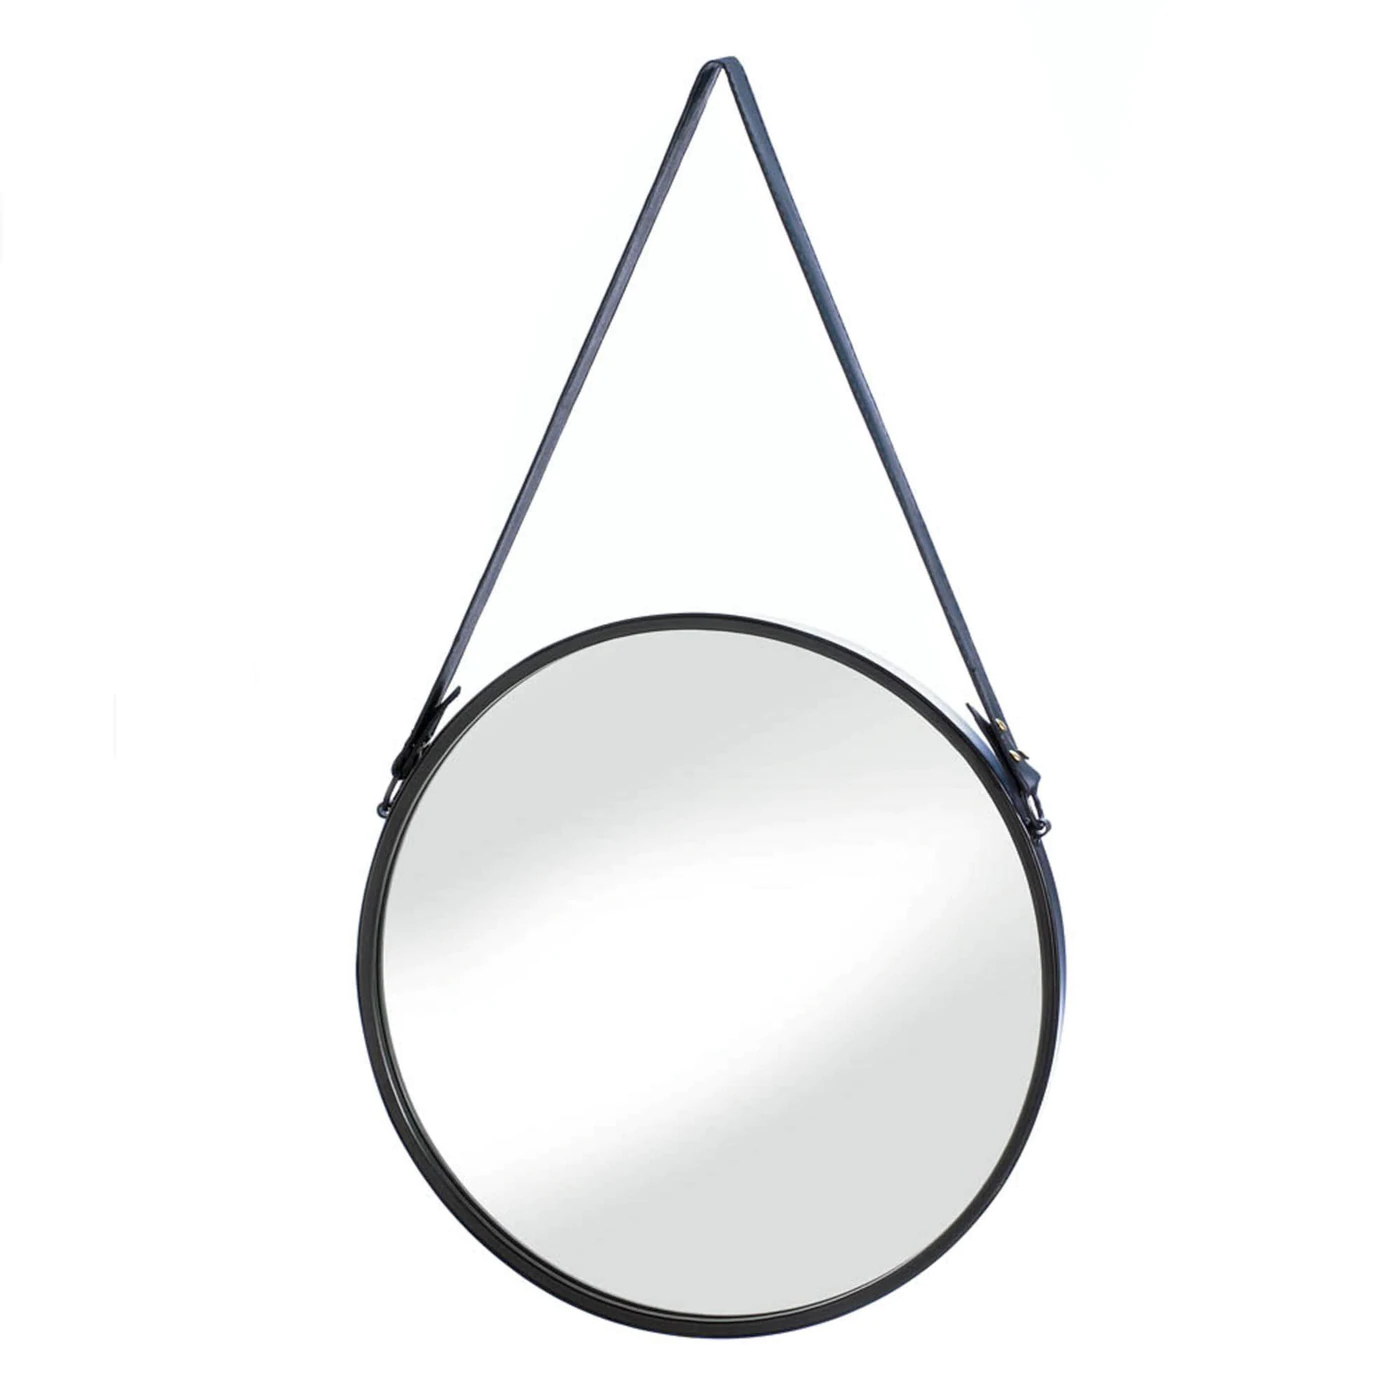 Hanging Mirror With Faux Leather Strap - $46.80